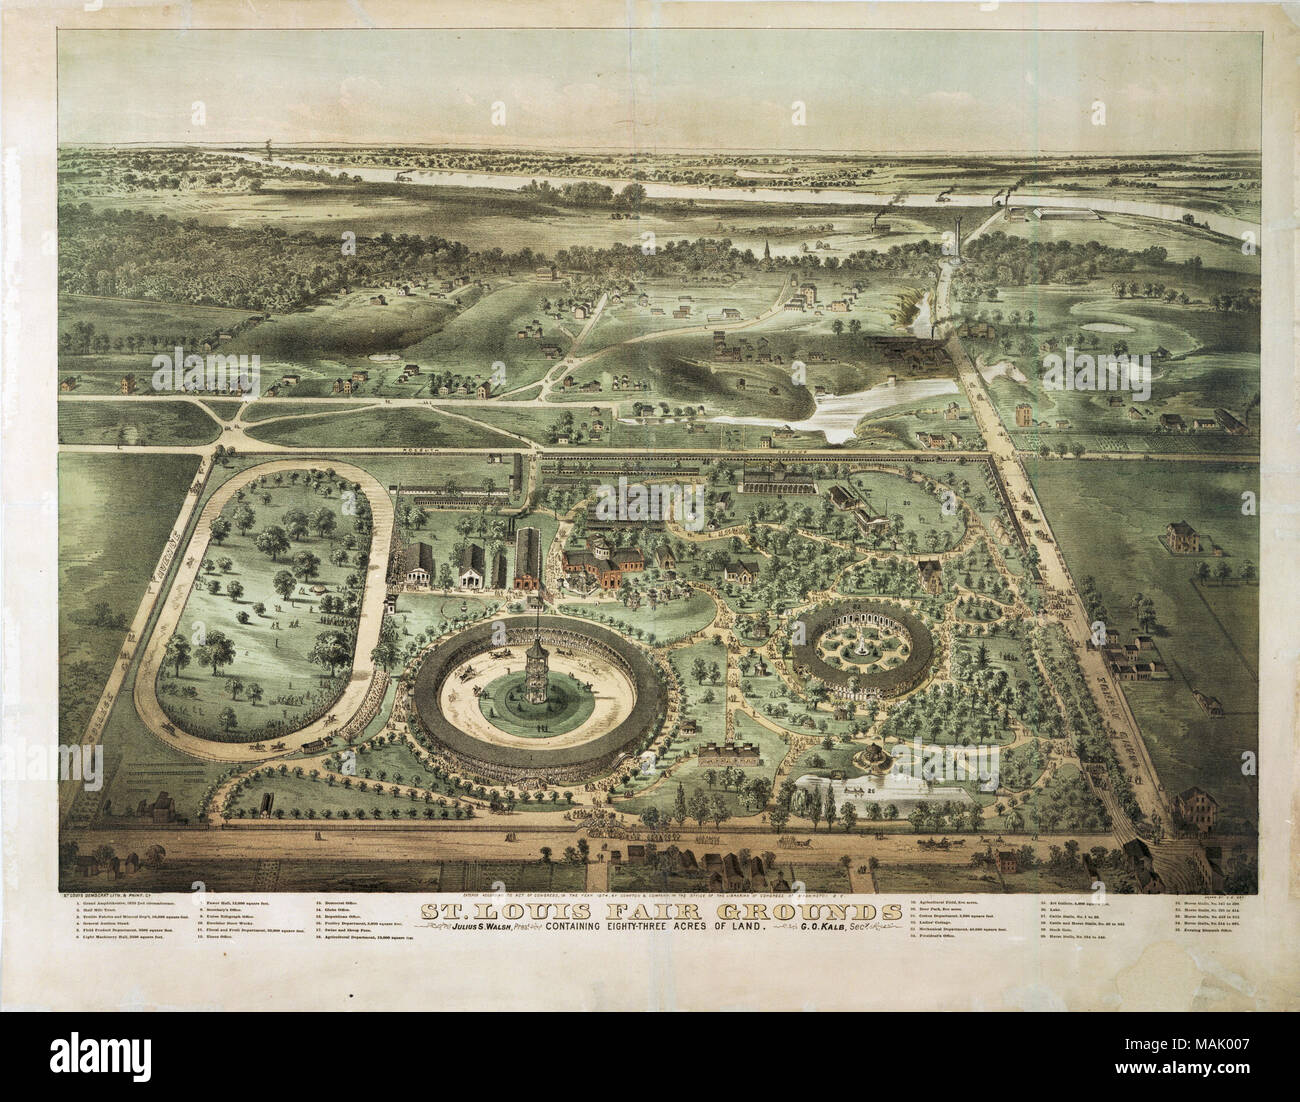 Title: St. Louis Fair Grounds. Containing Eighty-Three Acres of Land.  . 1874. St. Louis Democrat Lith and Print Co., after Camille N. Dry Stock Photo